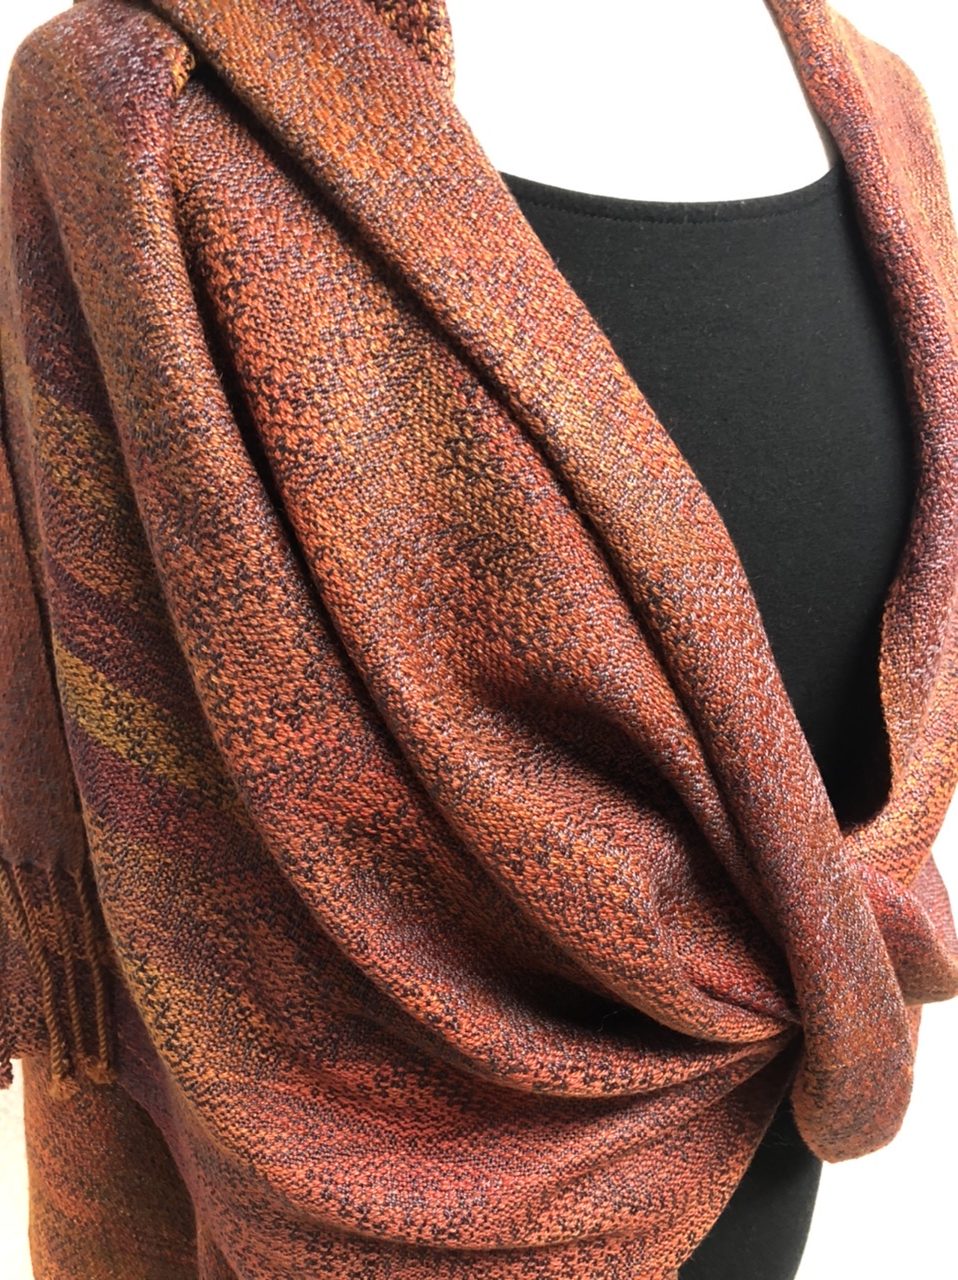 Merino and Cashmere Autumn Leaves Scarf